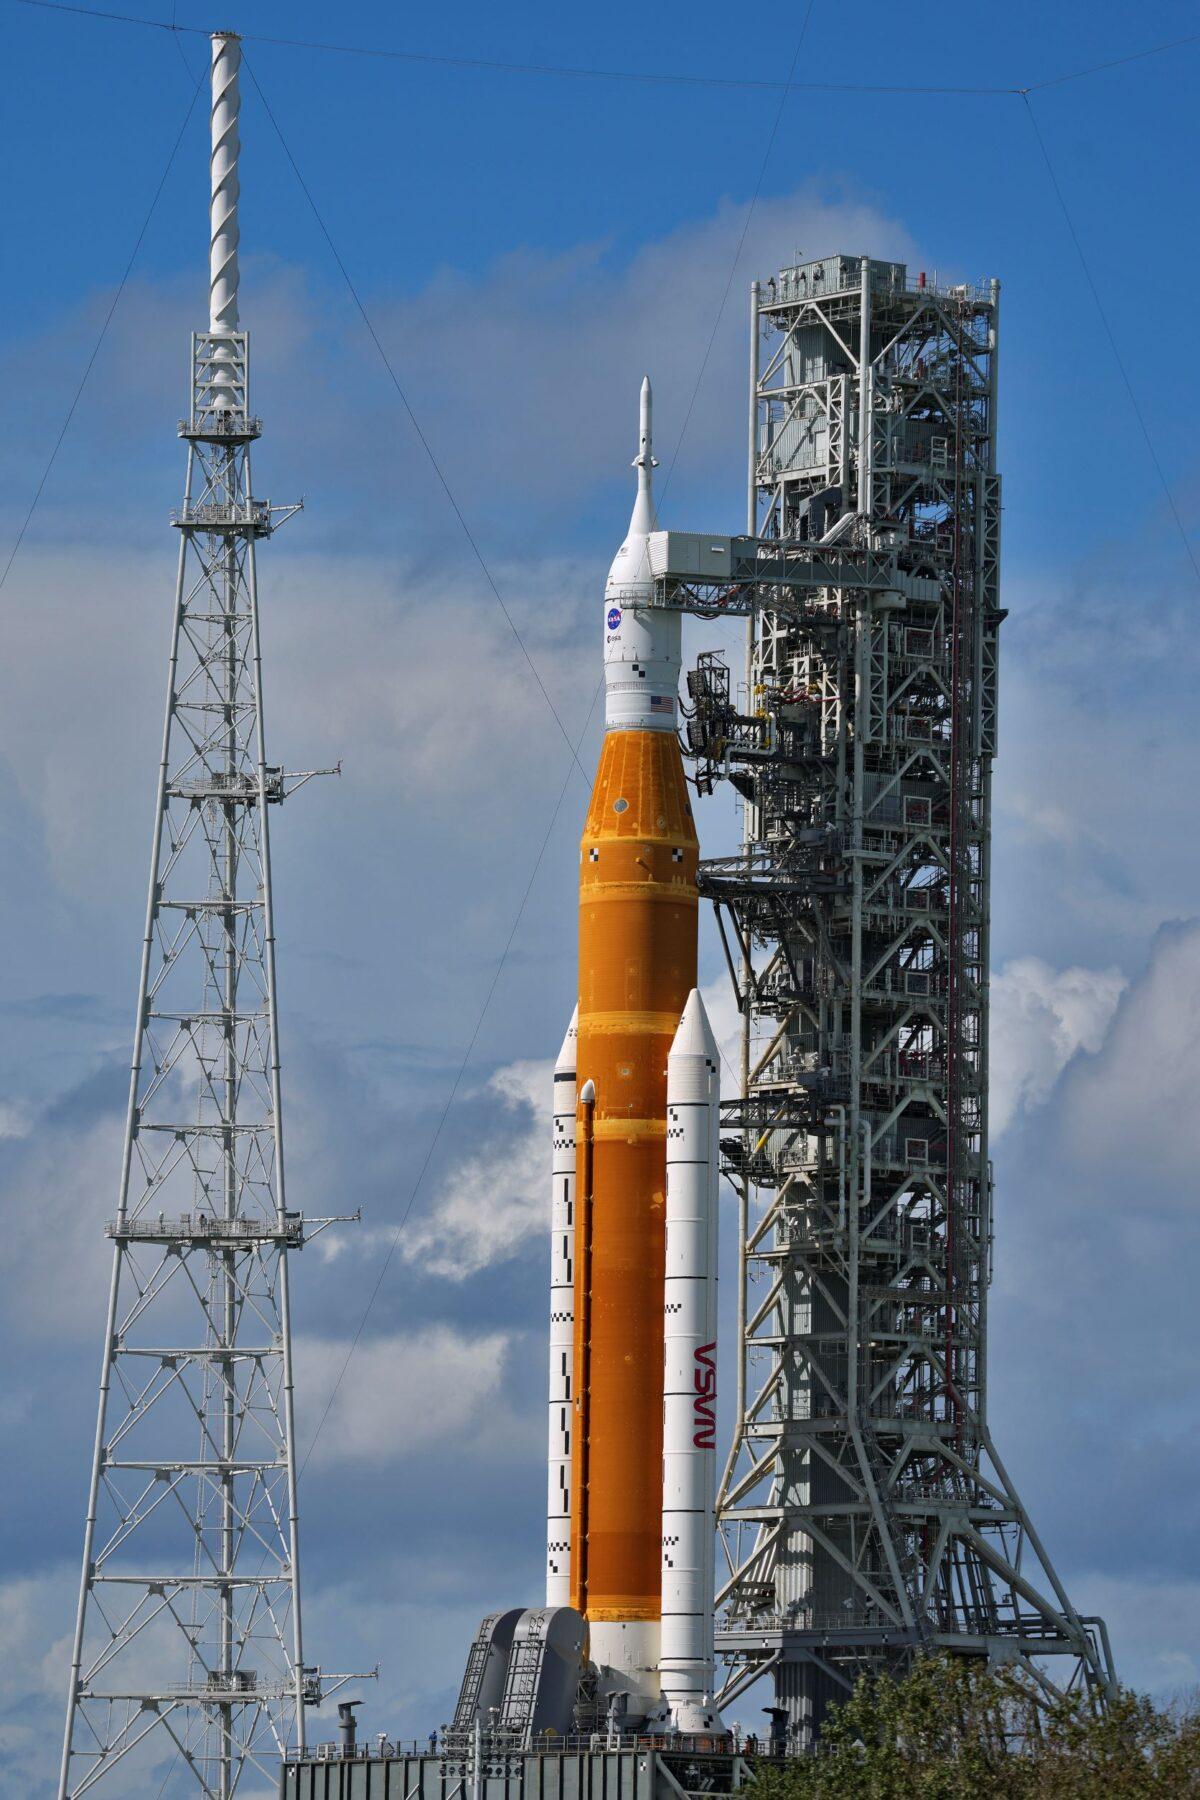 NASA's new moon rocket sits on Launch Pad 39-B in Cape Canaveral, Fla., on Nov. 11, 2022. (Chris O'Meara/AP Photo)